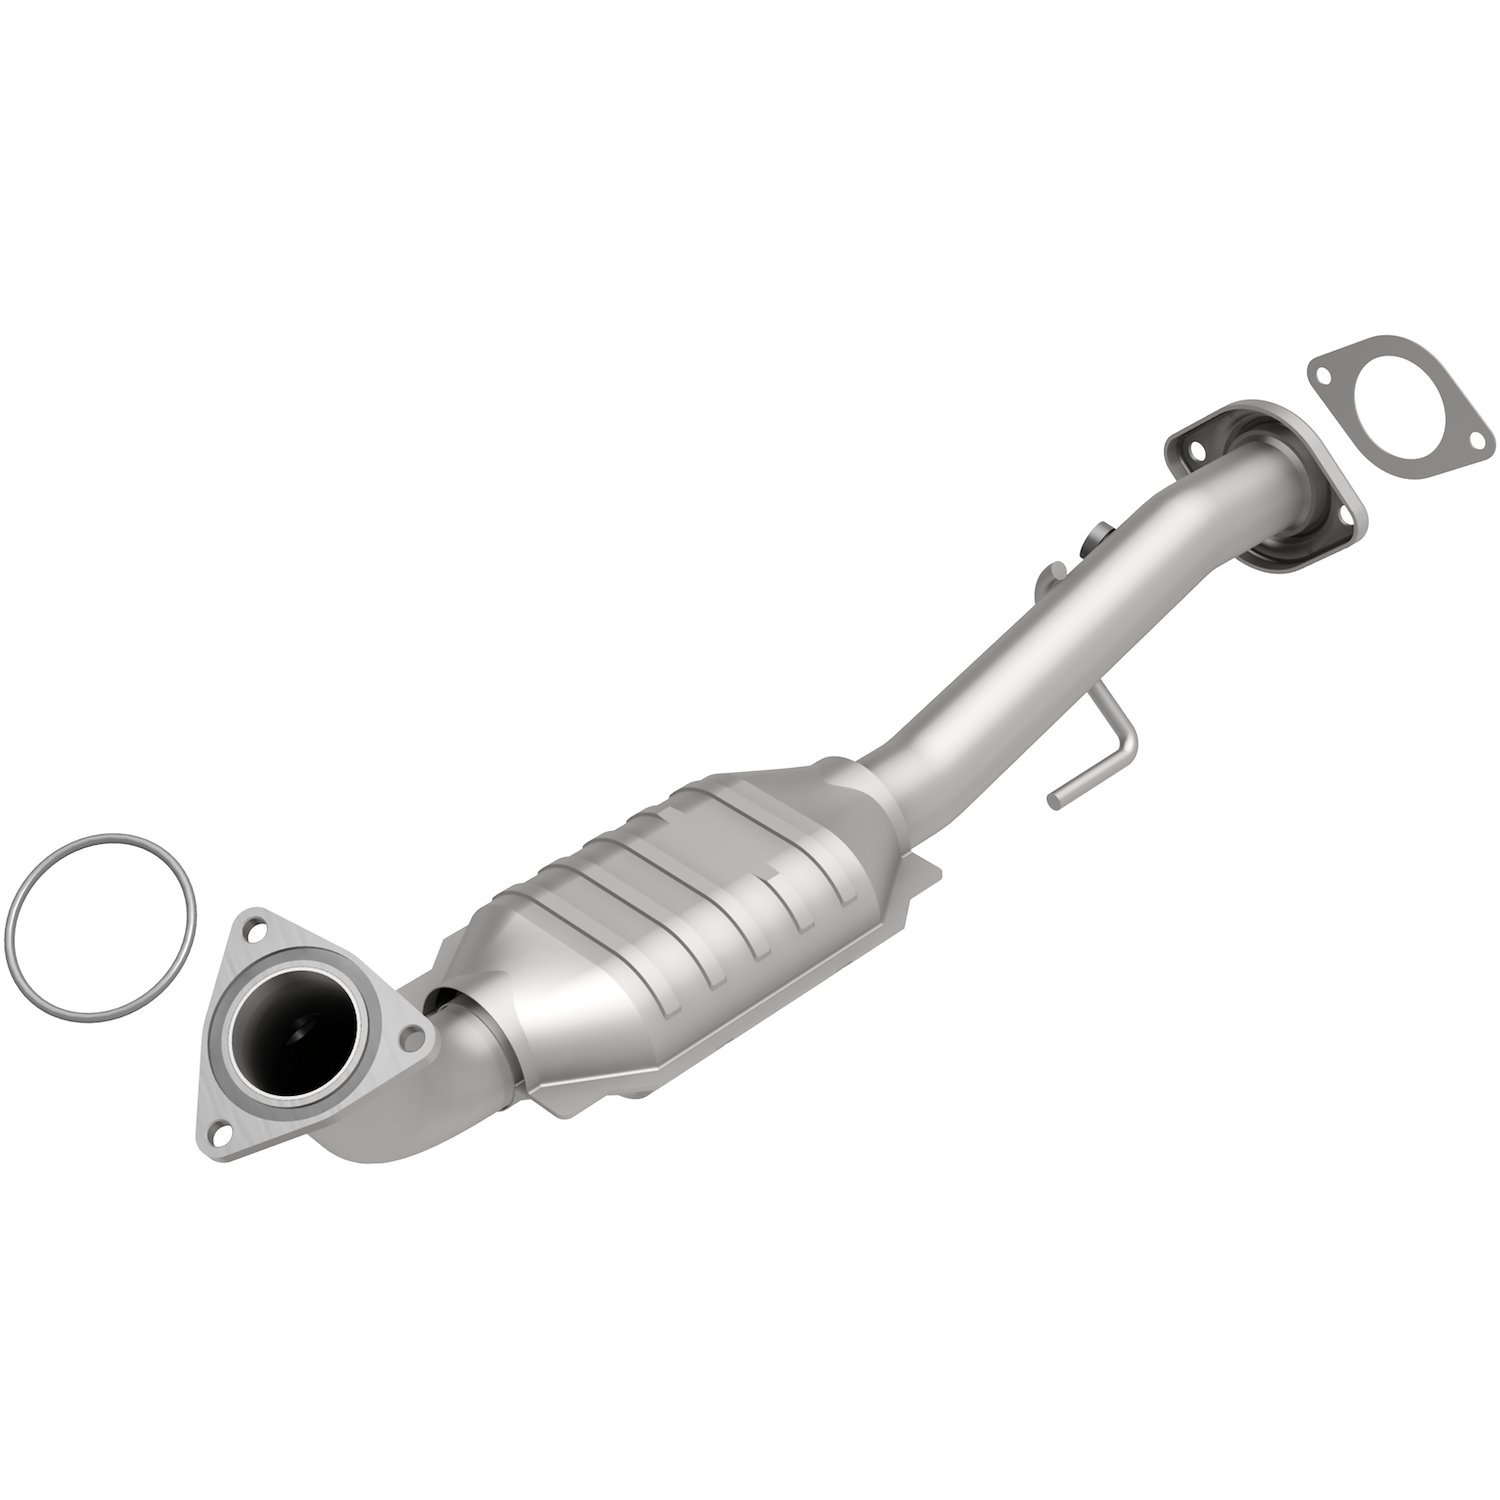 OEM Grade Federal / EPA Compliant Direct-Fit Catalytic Converter 49649